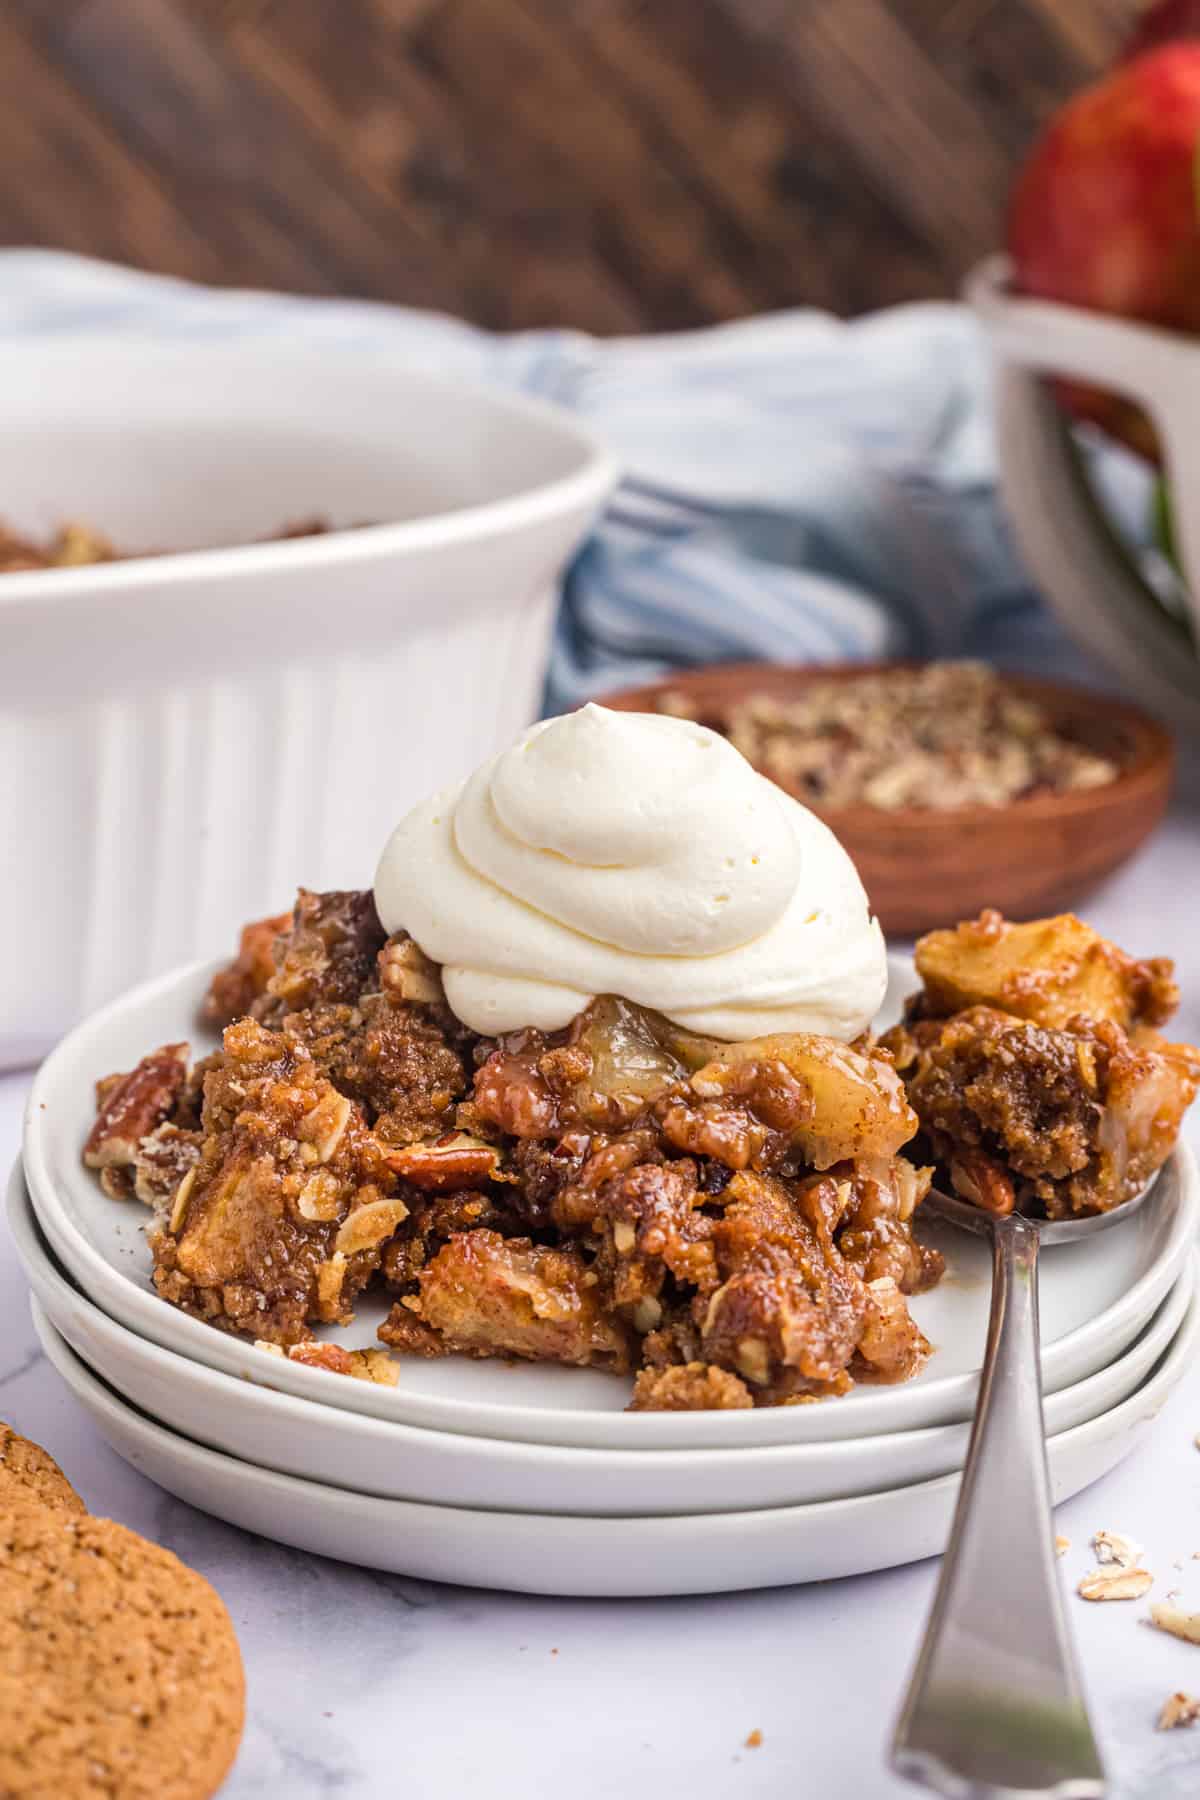 A dollop of whipped cream is on top of a serving of gingersnap apple crisp.